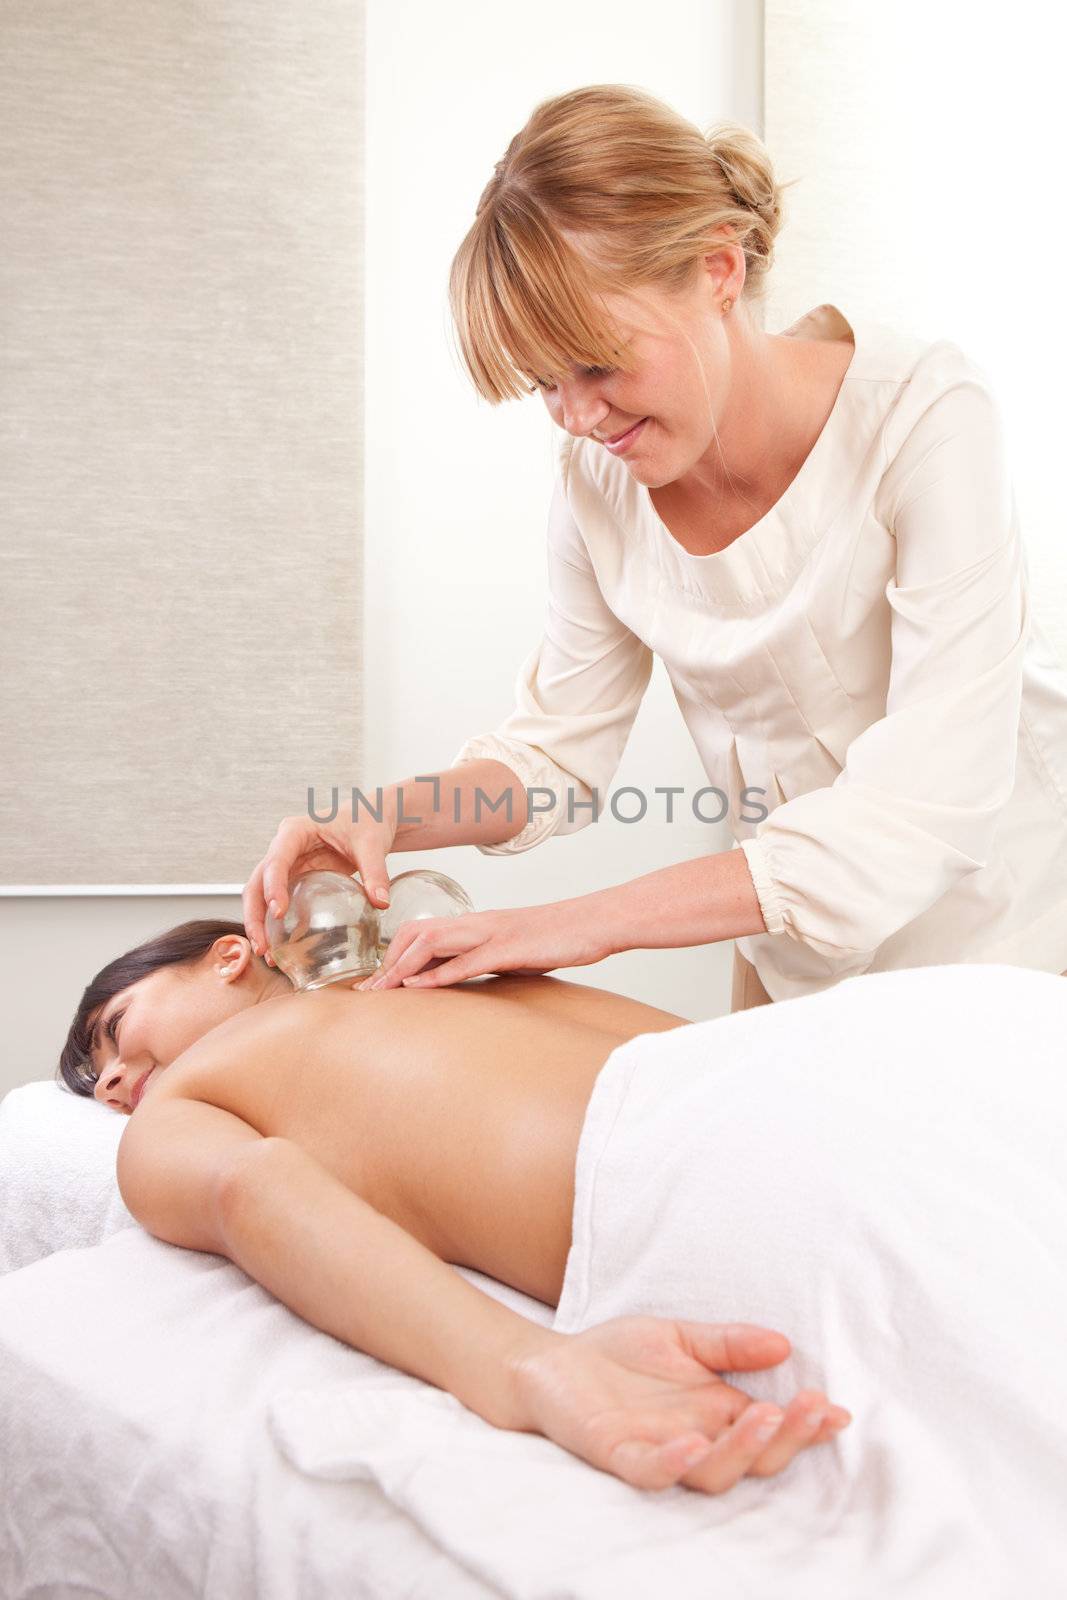 Portrait of an acupuncturist removing a glass globe in a fire cupping therapy session